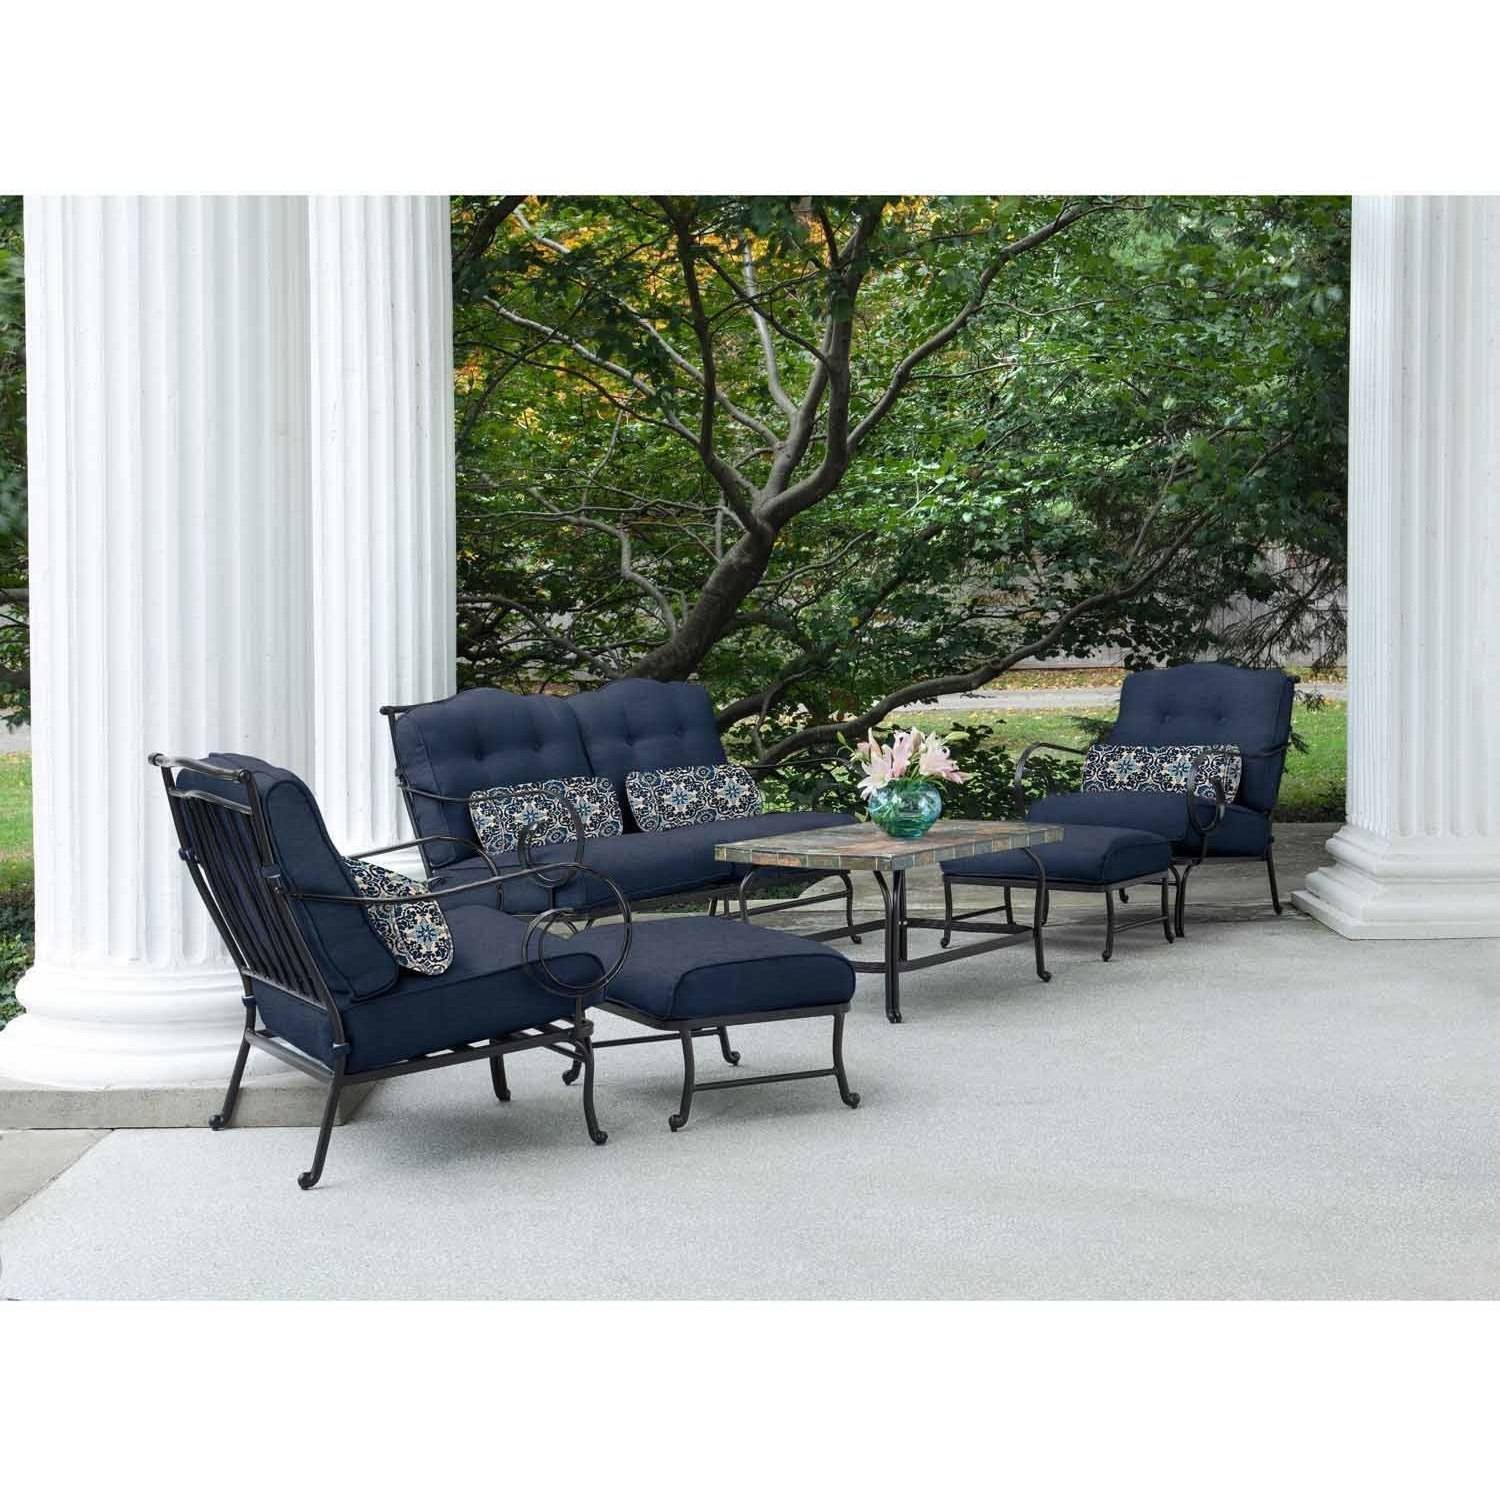 6-Piece Patio Set with Stone-Top Coffee Table - image 1 of 8